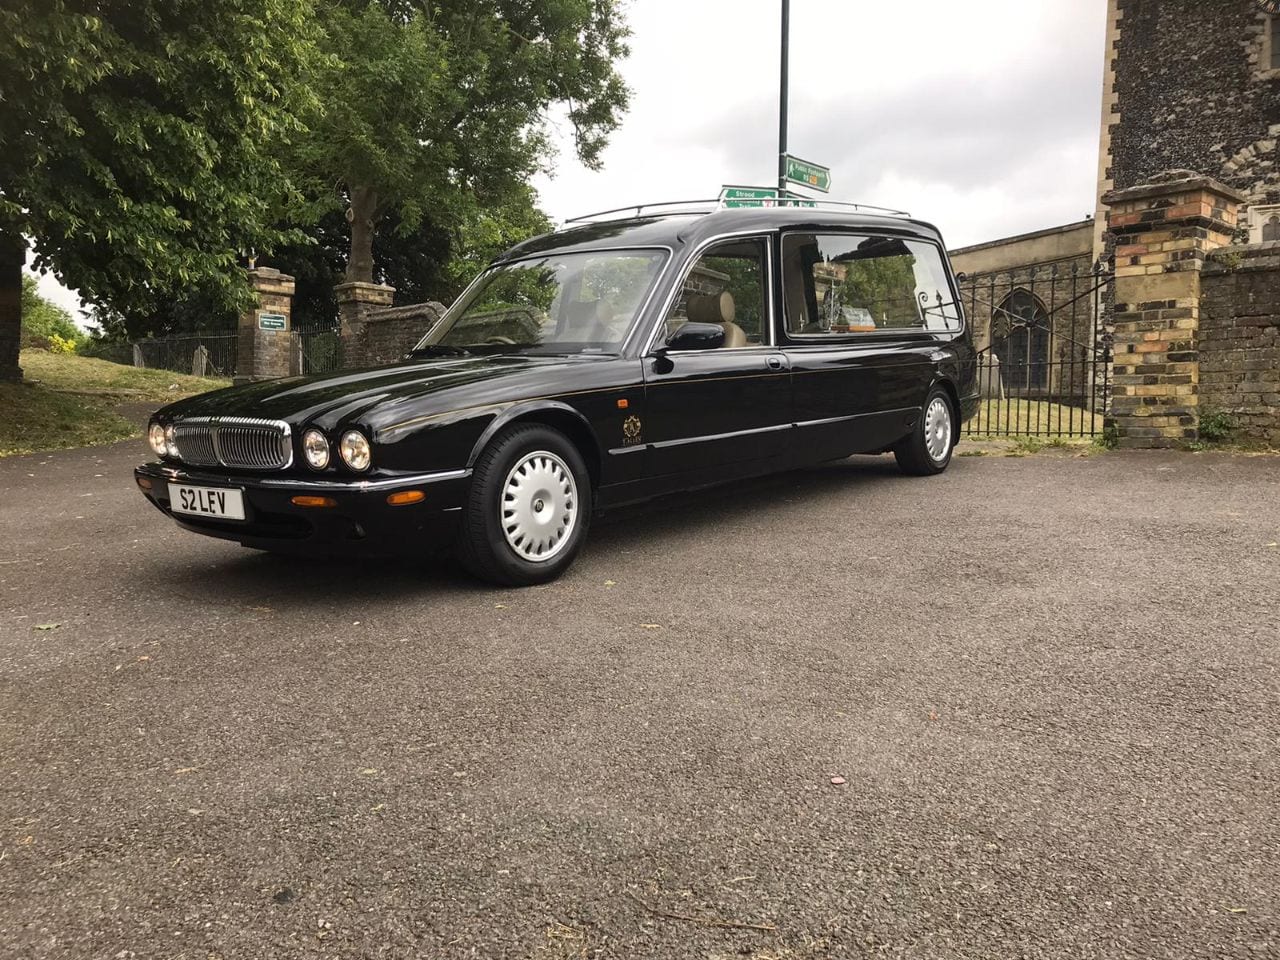 Traditional style Terry Allen funeral car parked outside of church